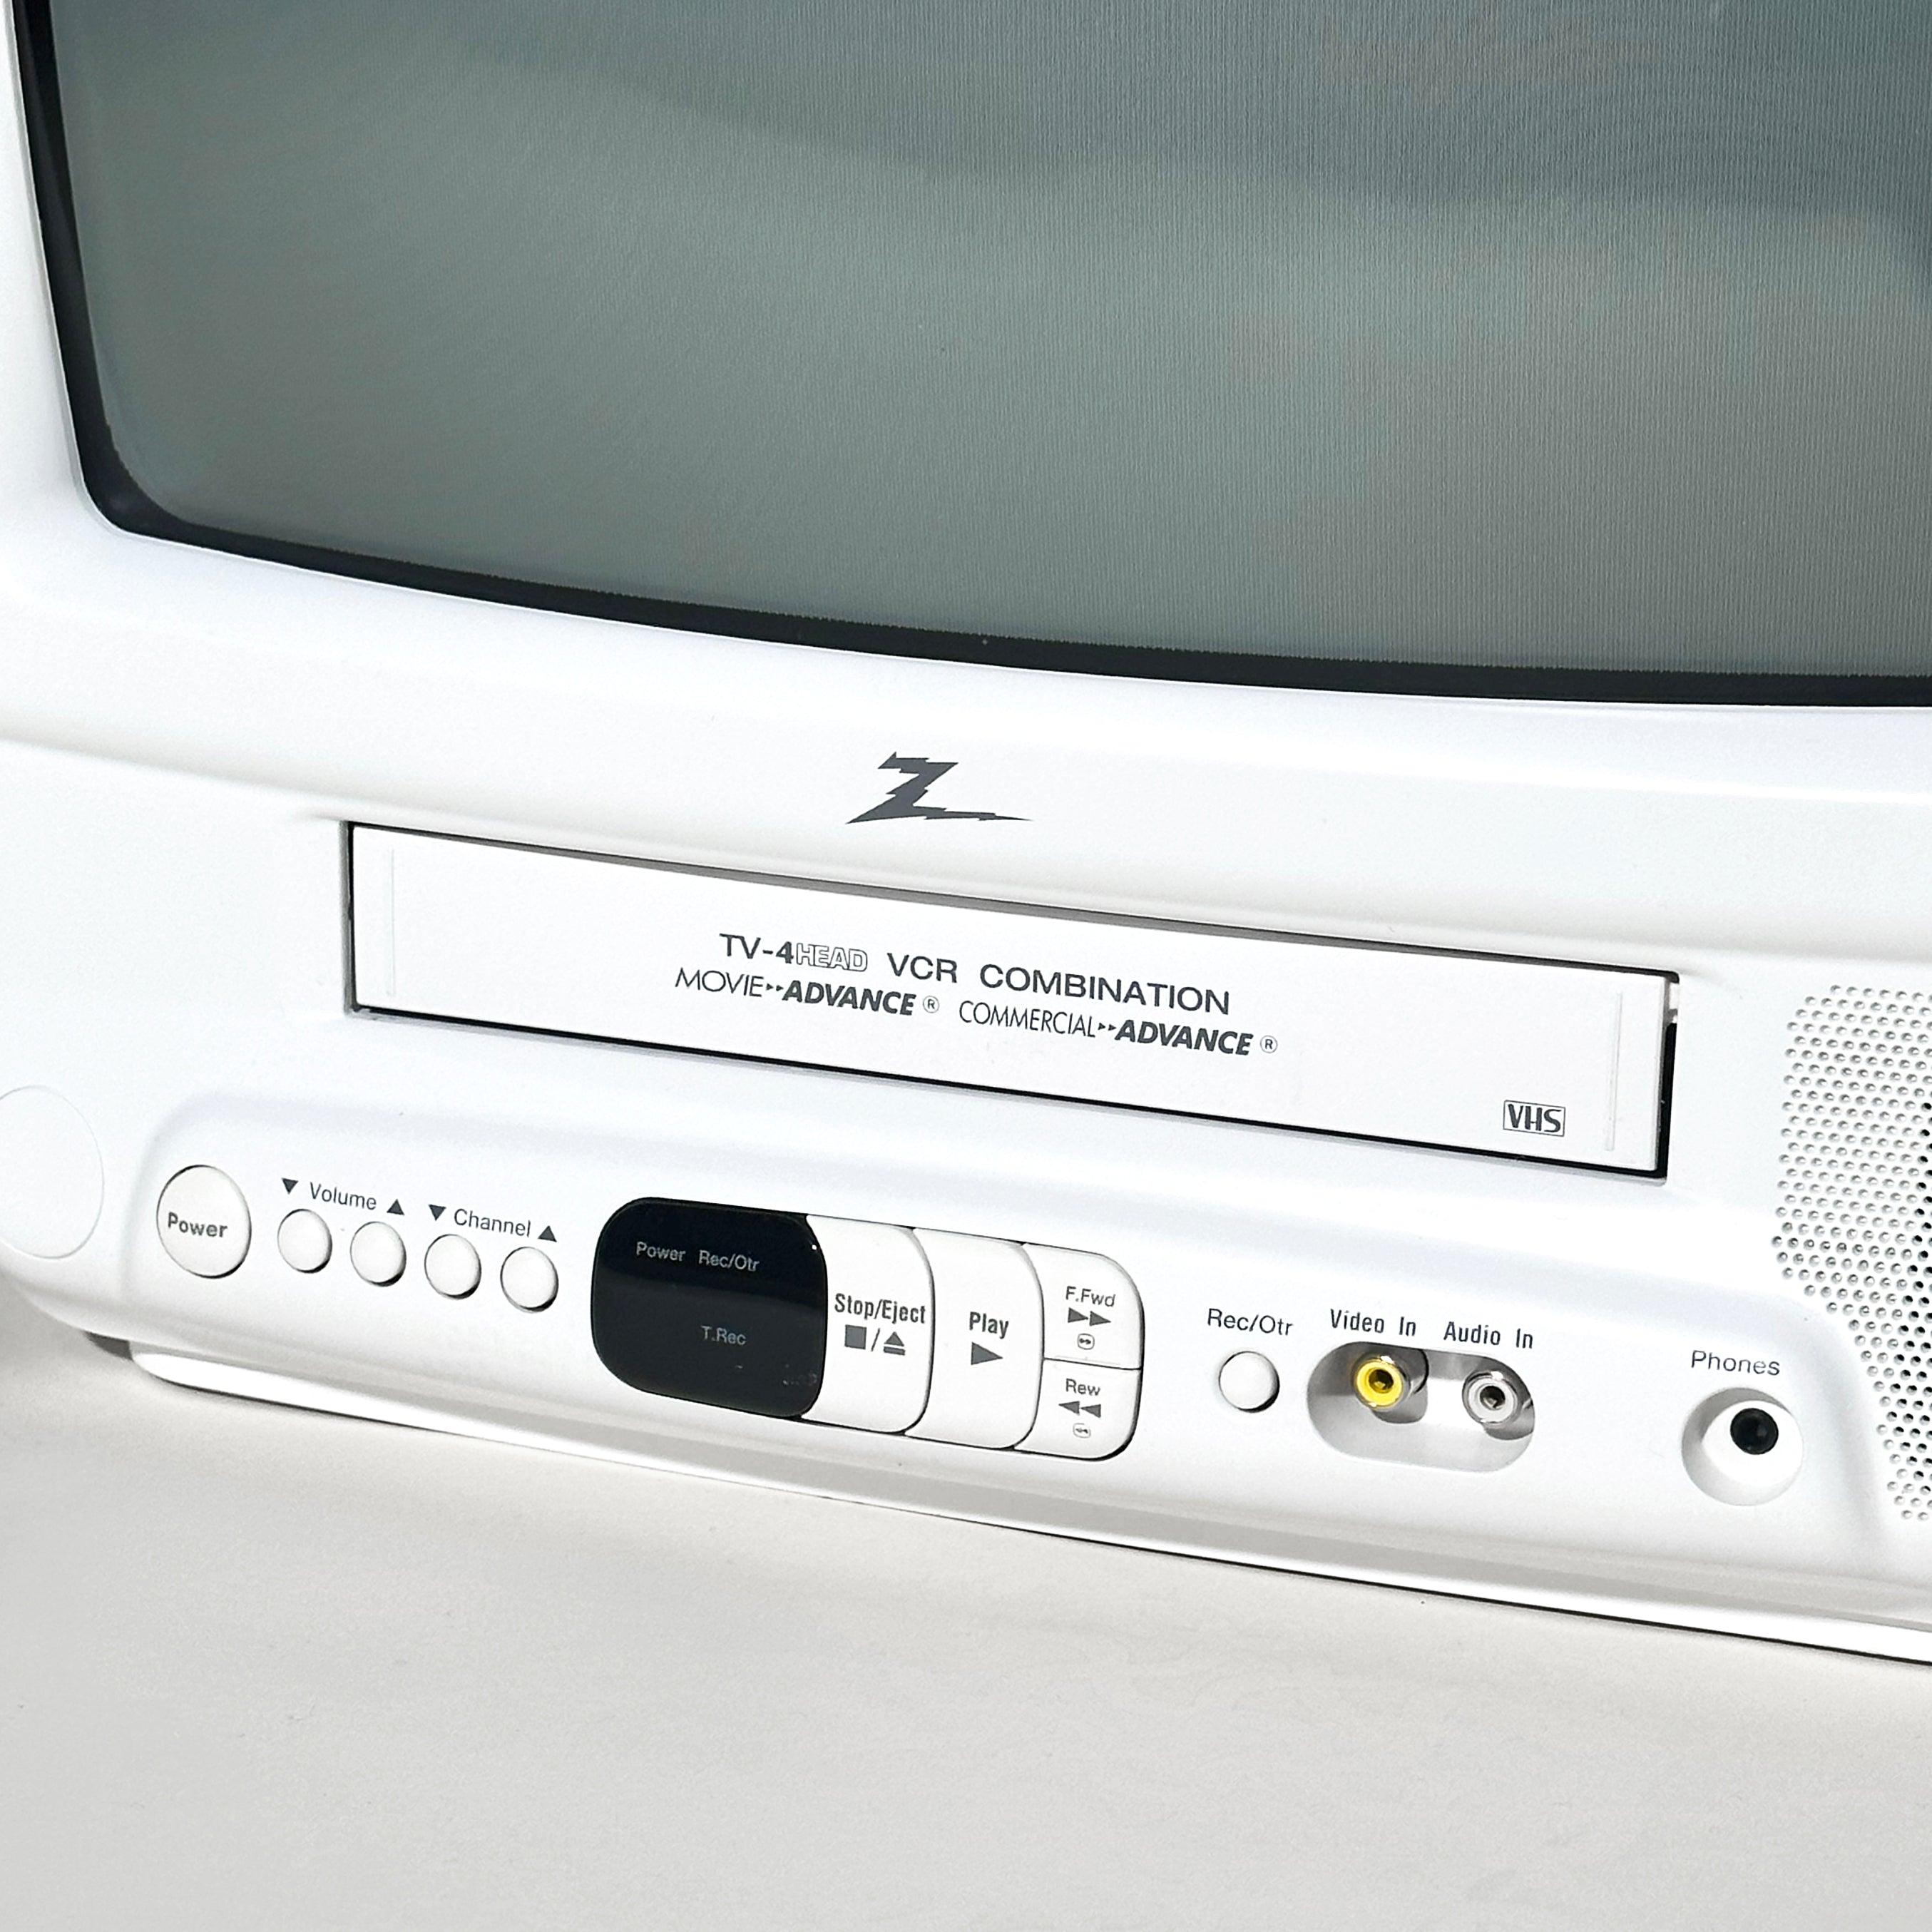 Zenith White CRT TV and VCR Television (New Old Stock)